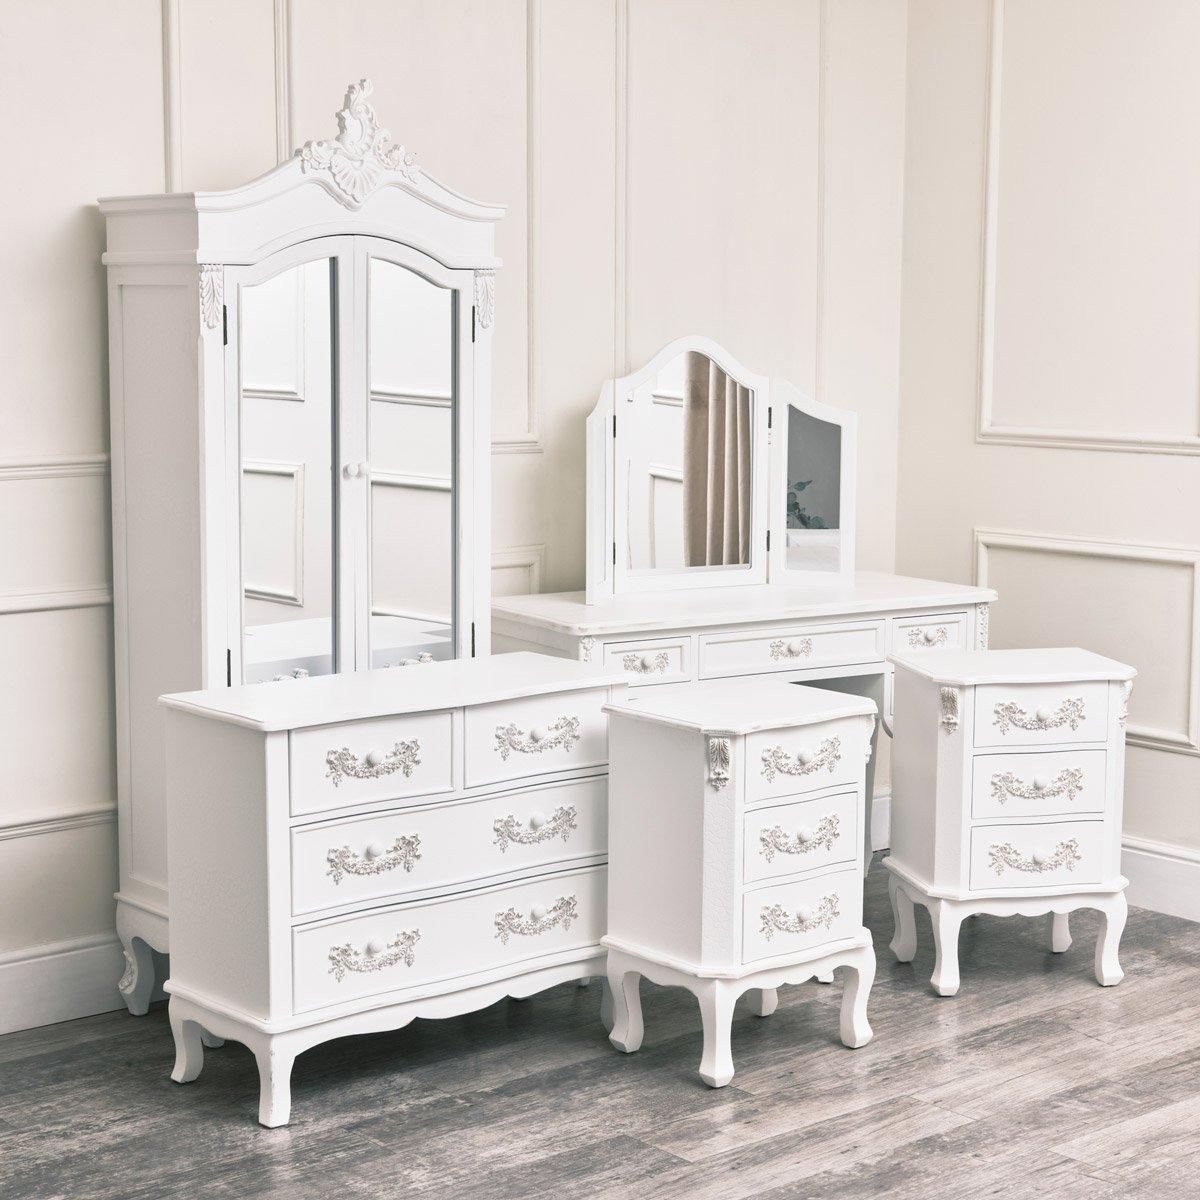 Antique White Closet, Dressing Table Set, Chest Of Drawers & Pair Of Bedside Tables - Pays Blanc Ran